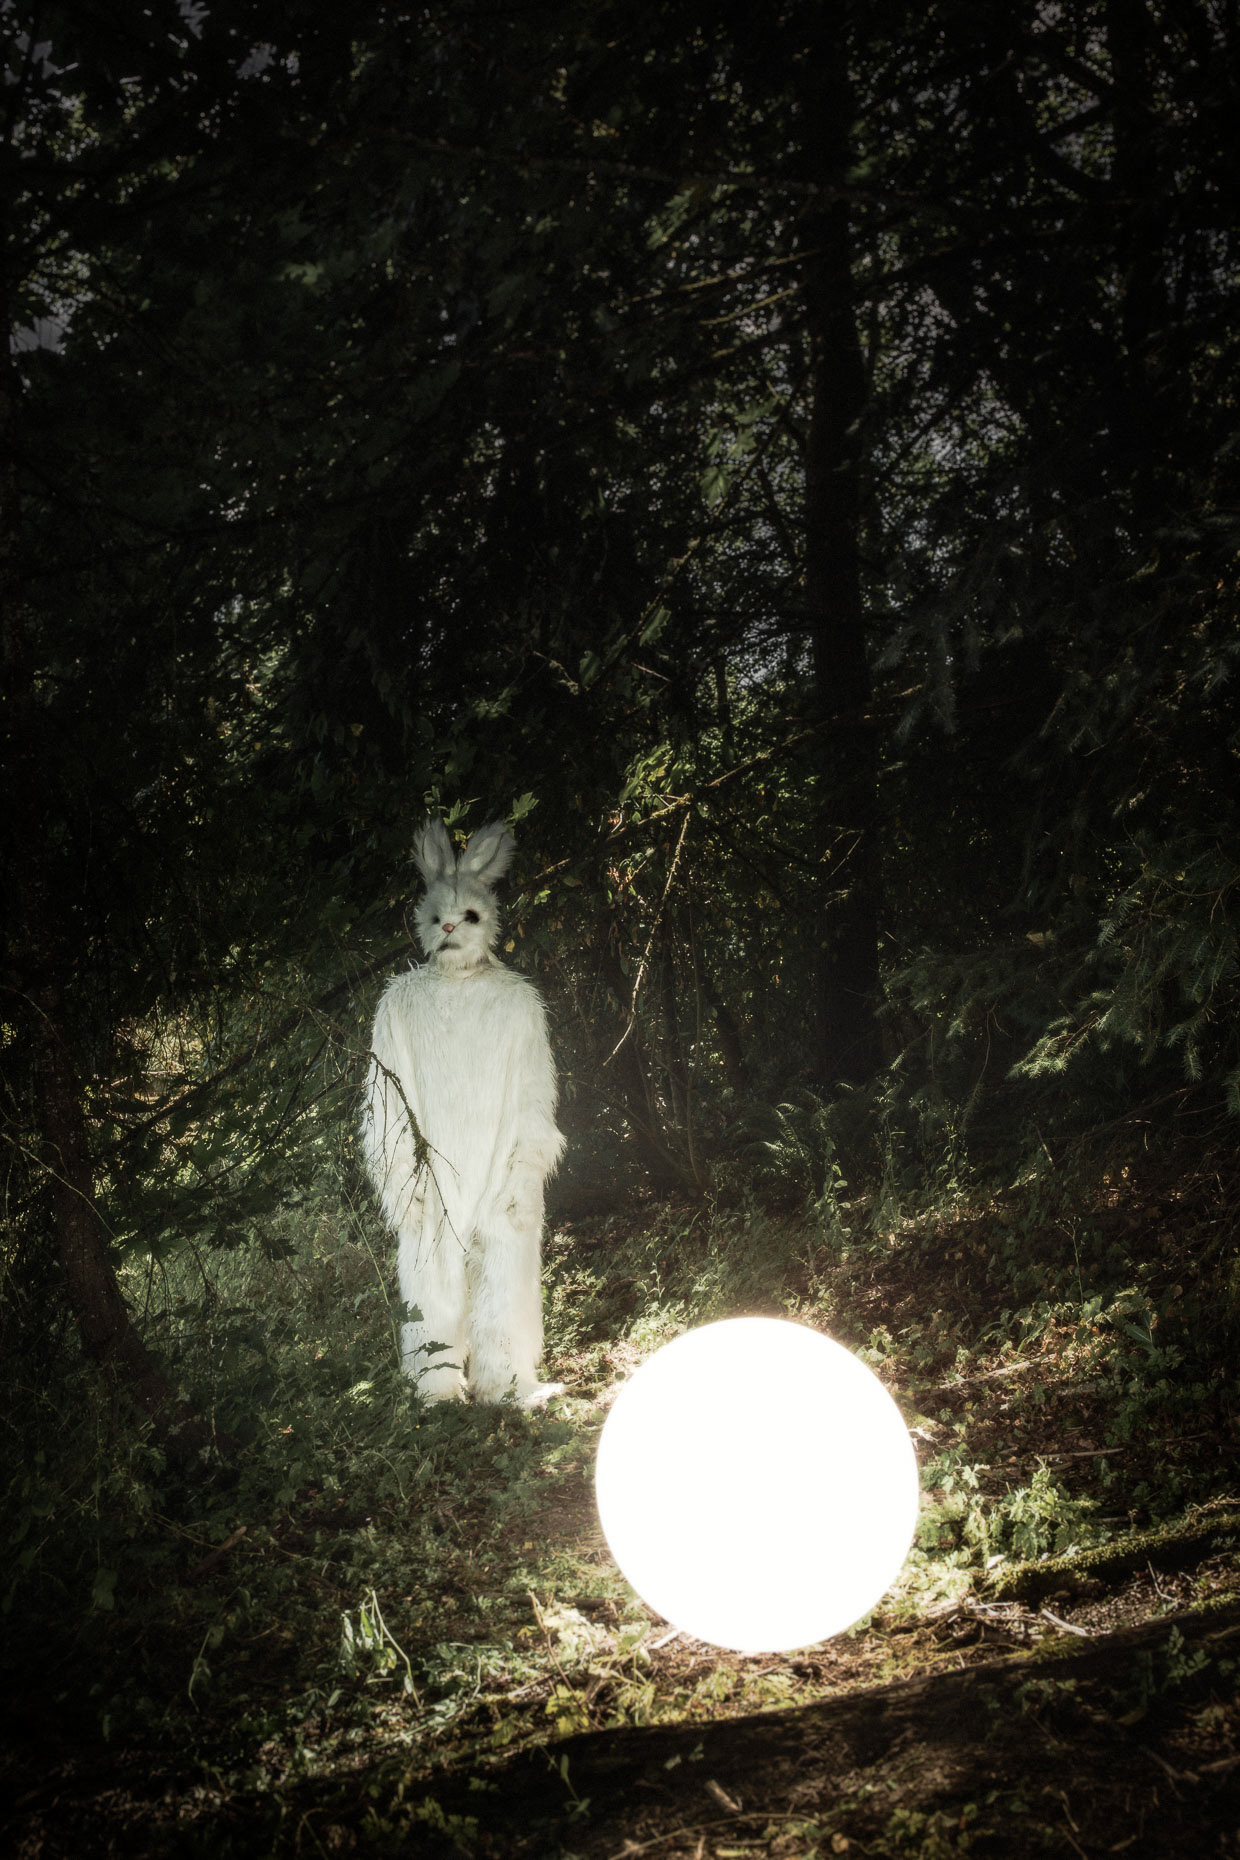 Moody scene of a Scary Bunny Rabbit Donnie Darko in a haunted forest with glowing white ball. Poster art by Andy Batt